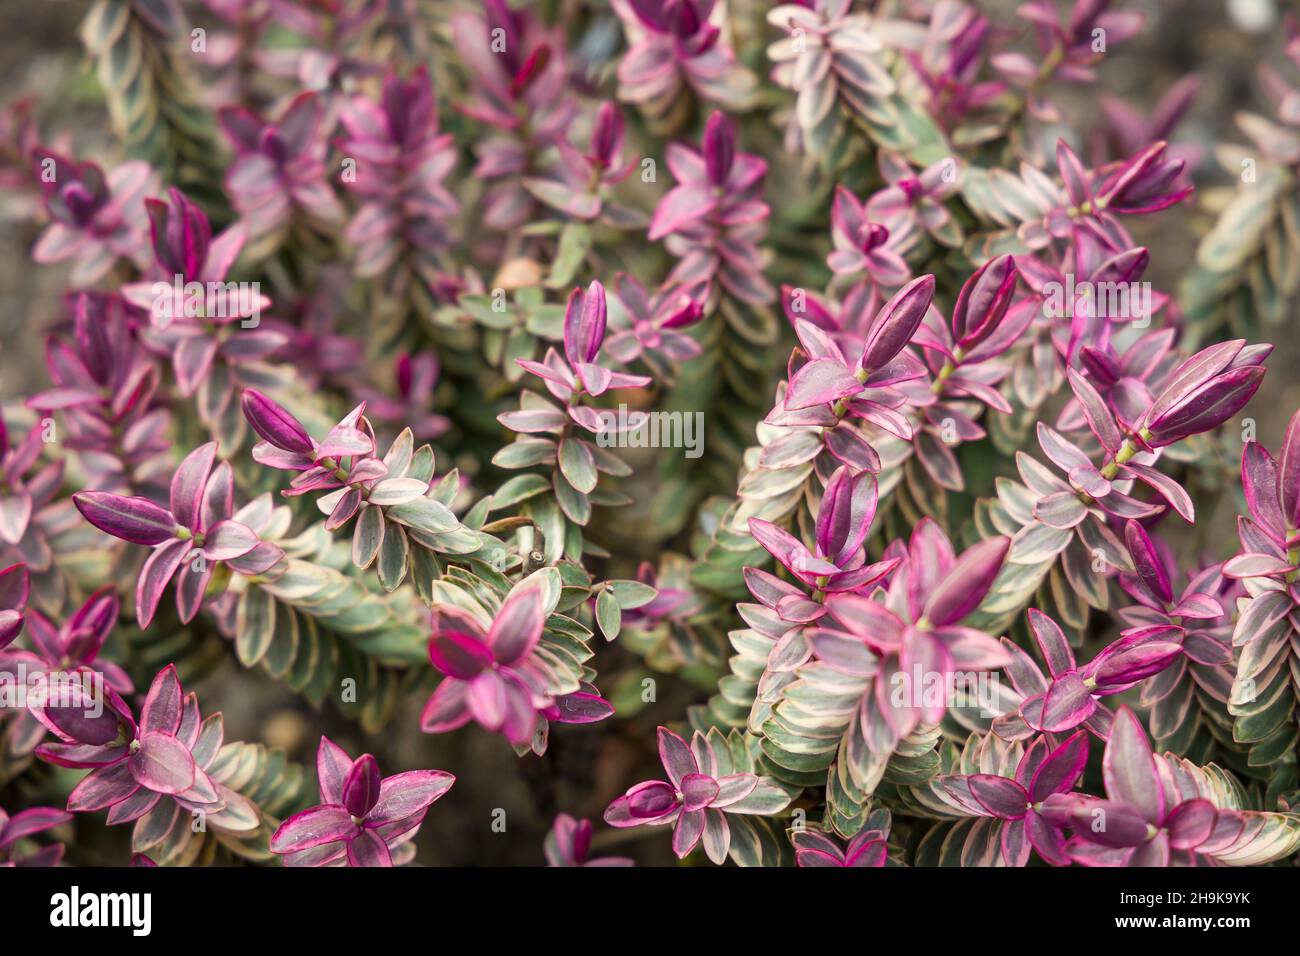 Hebe albicans silver dollar, close up of leaves in a UK garden Stock Photo